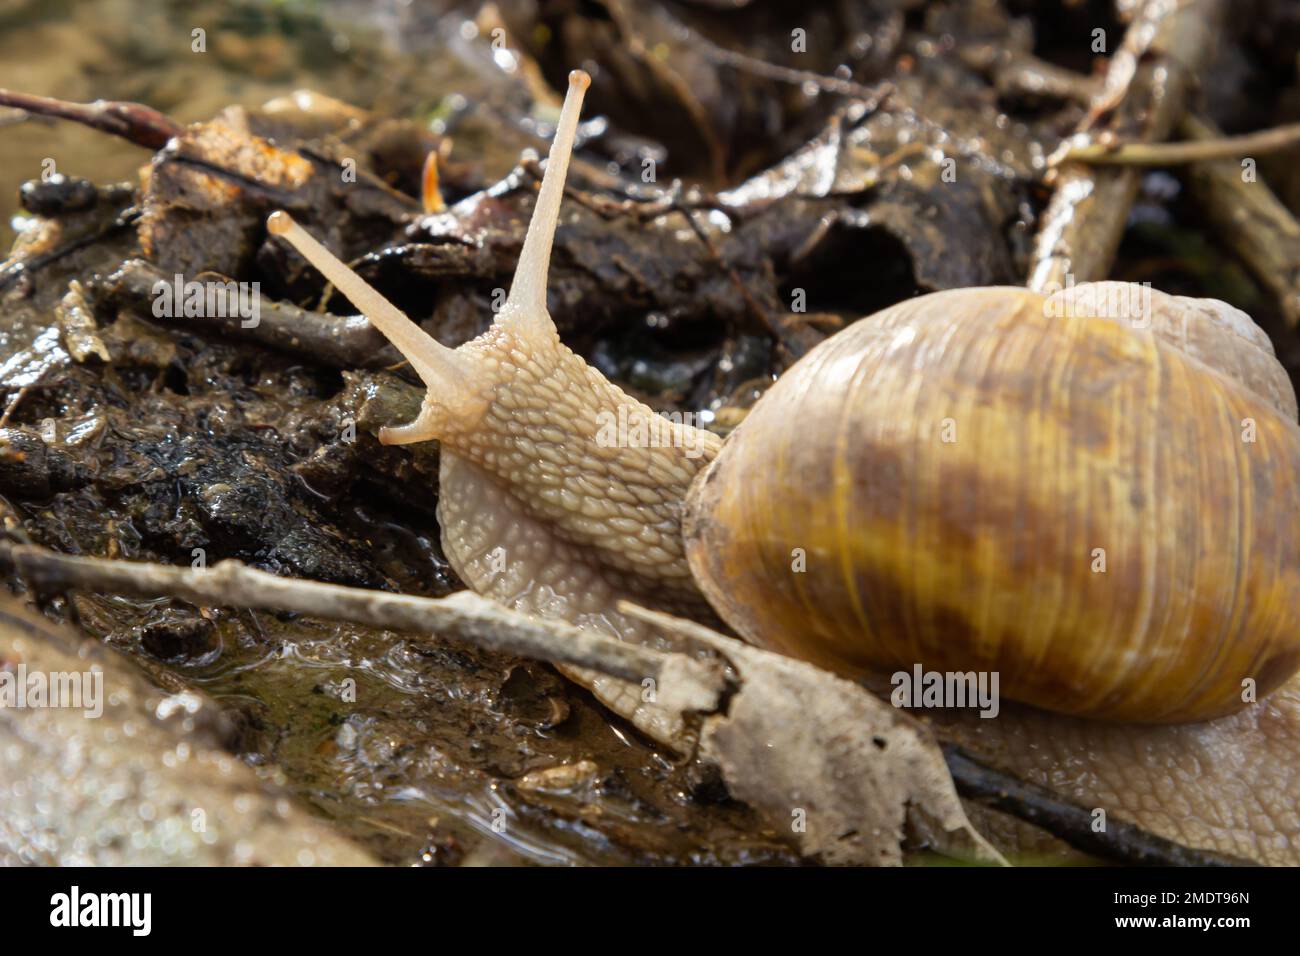 Burgundy snail, Helix, Roman snail, edible snail, escargot, on the surface of old stump with moss in a natural environment. Green moss and mold growin Stock Photo